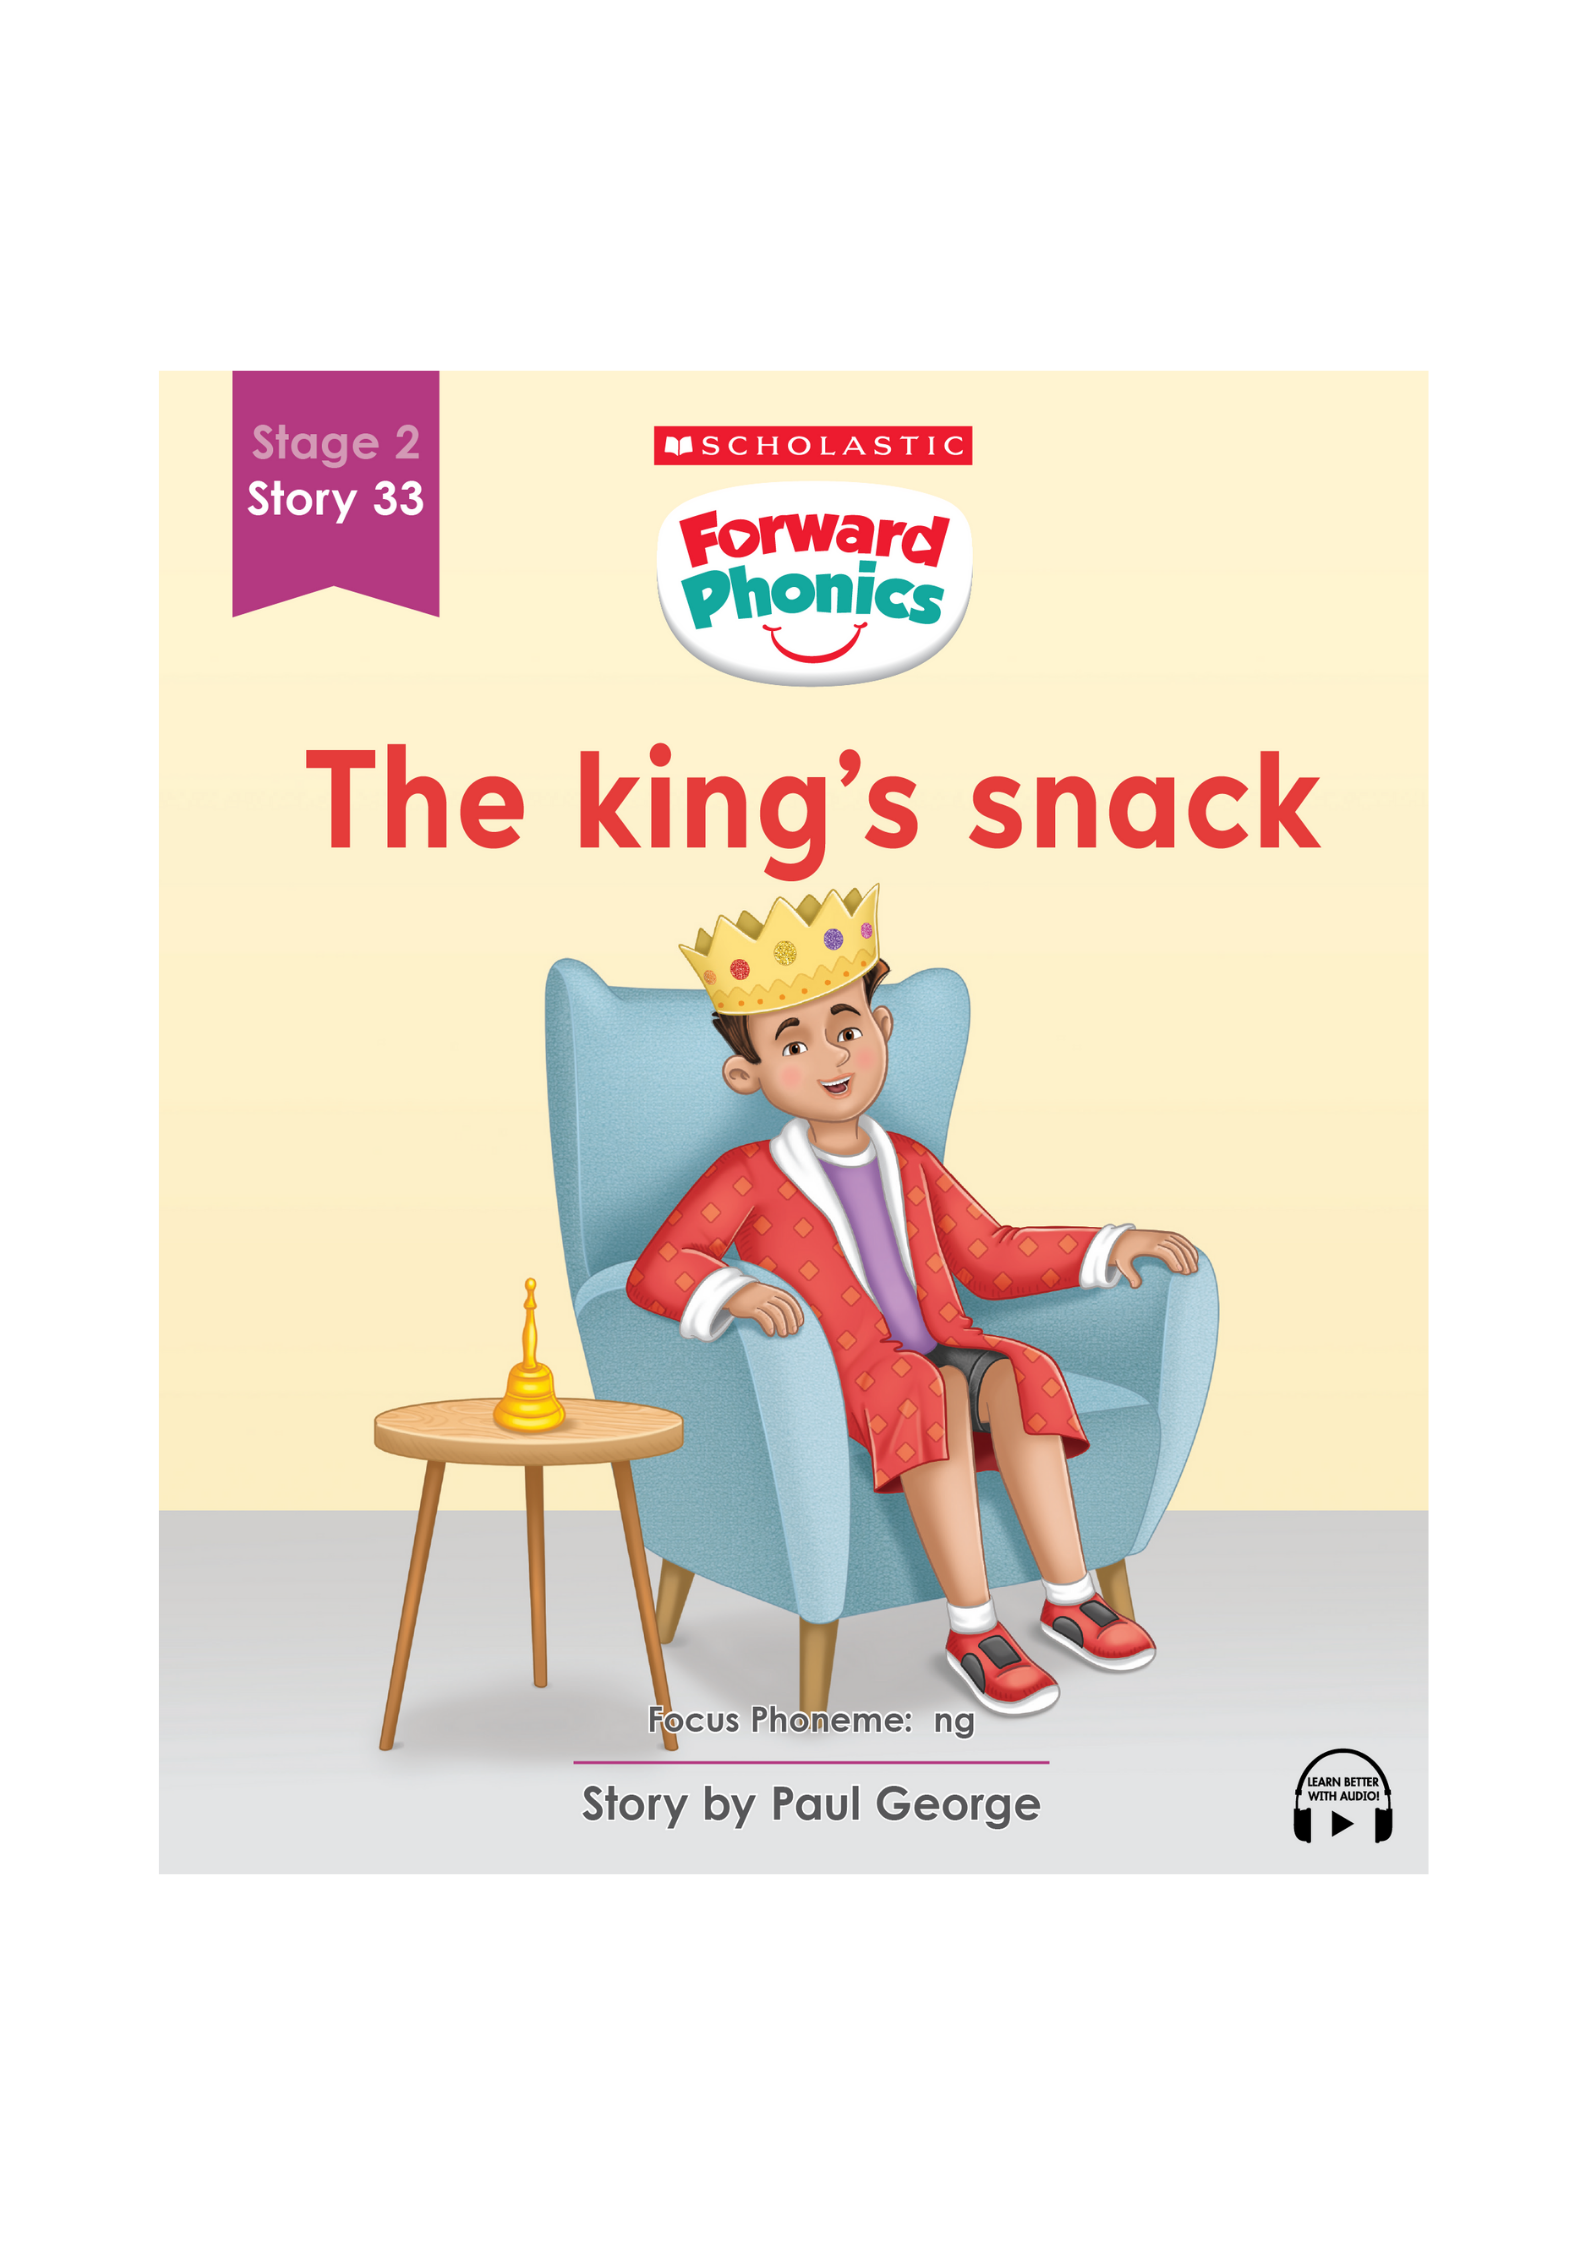 Forward Phonics #33: The King’s Snack